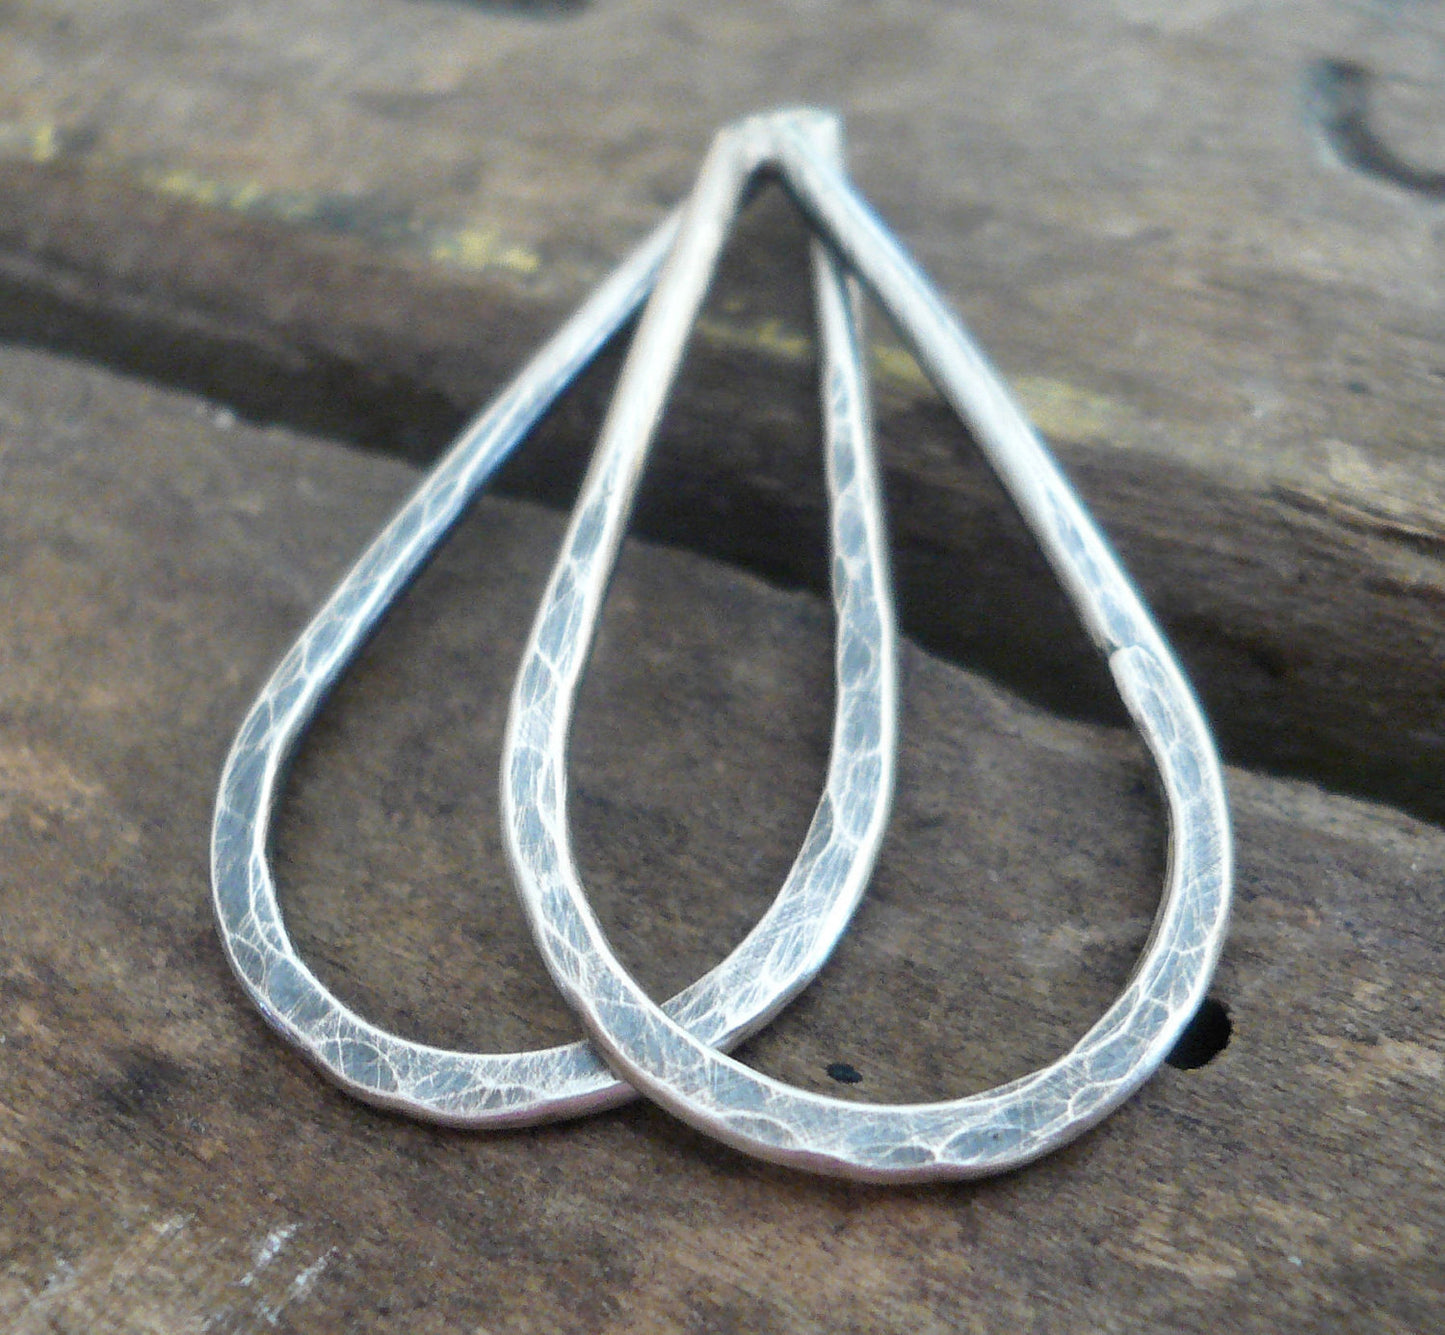 Large Hammered Oxidized Sterling Silver Tear Drops - Handmade. Hand forged. 27mm. 1 pair